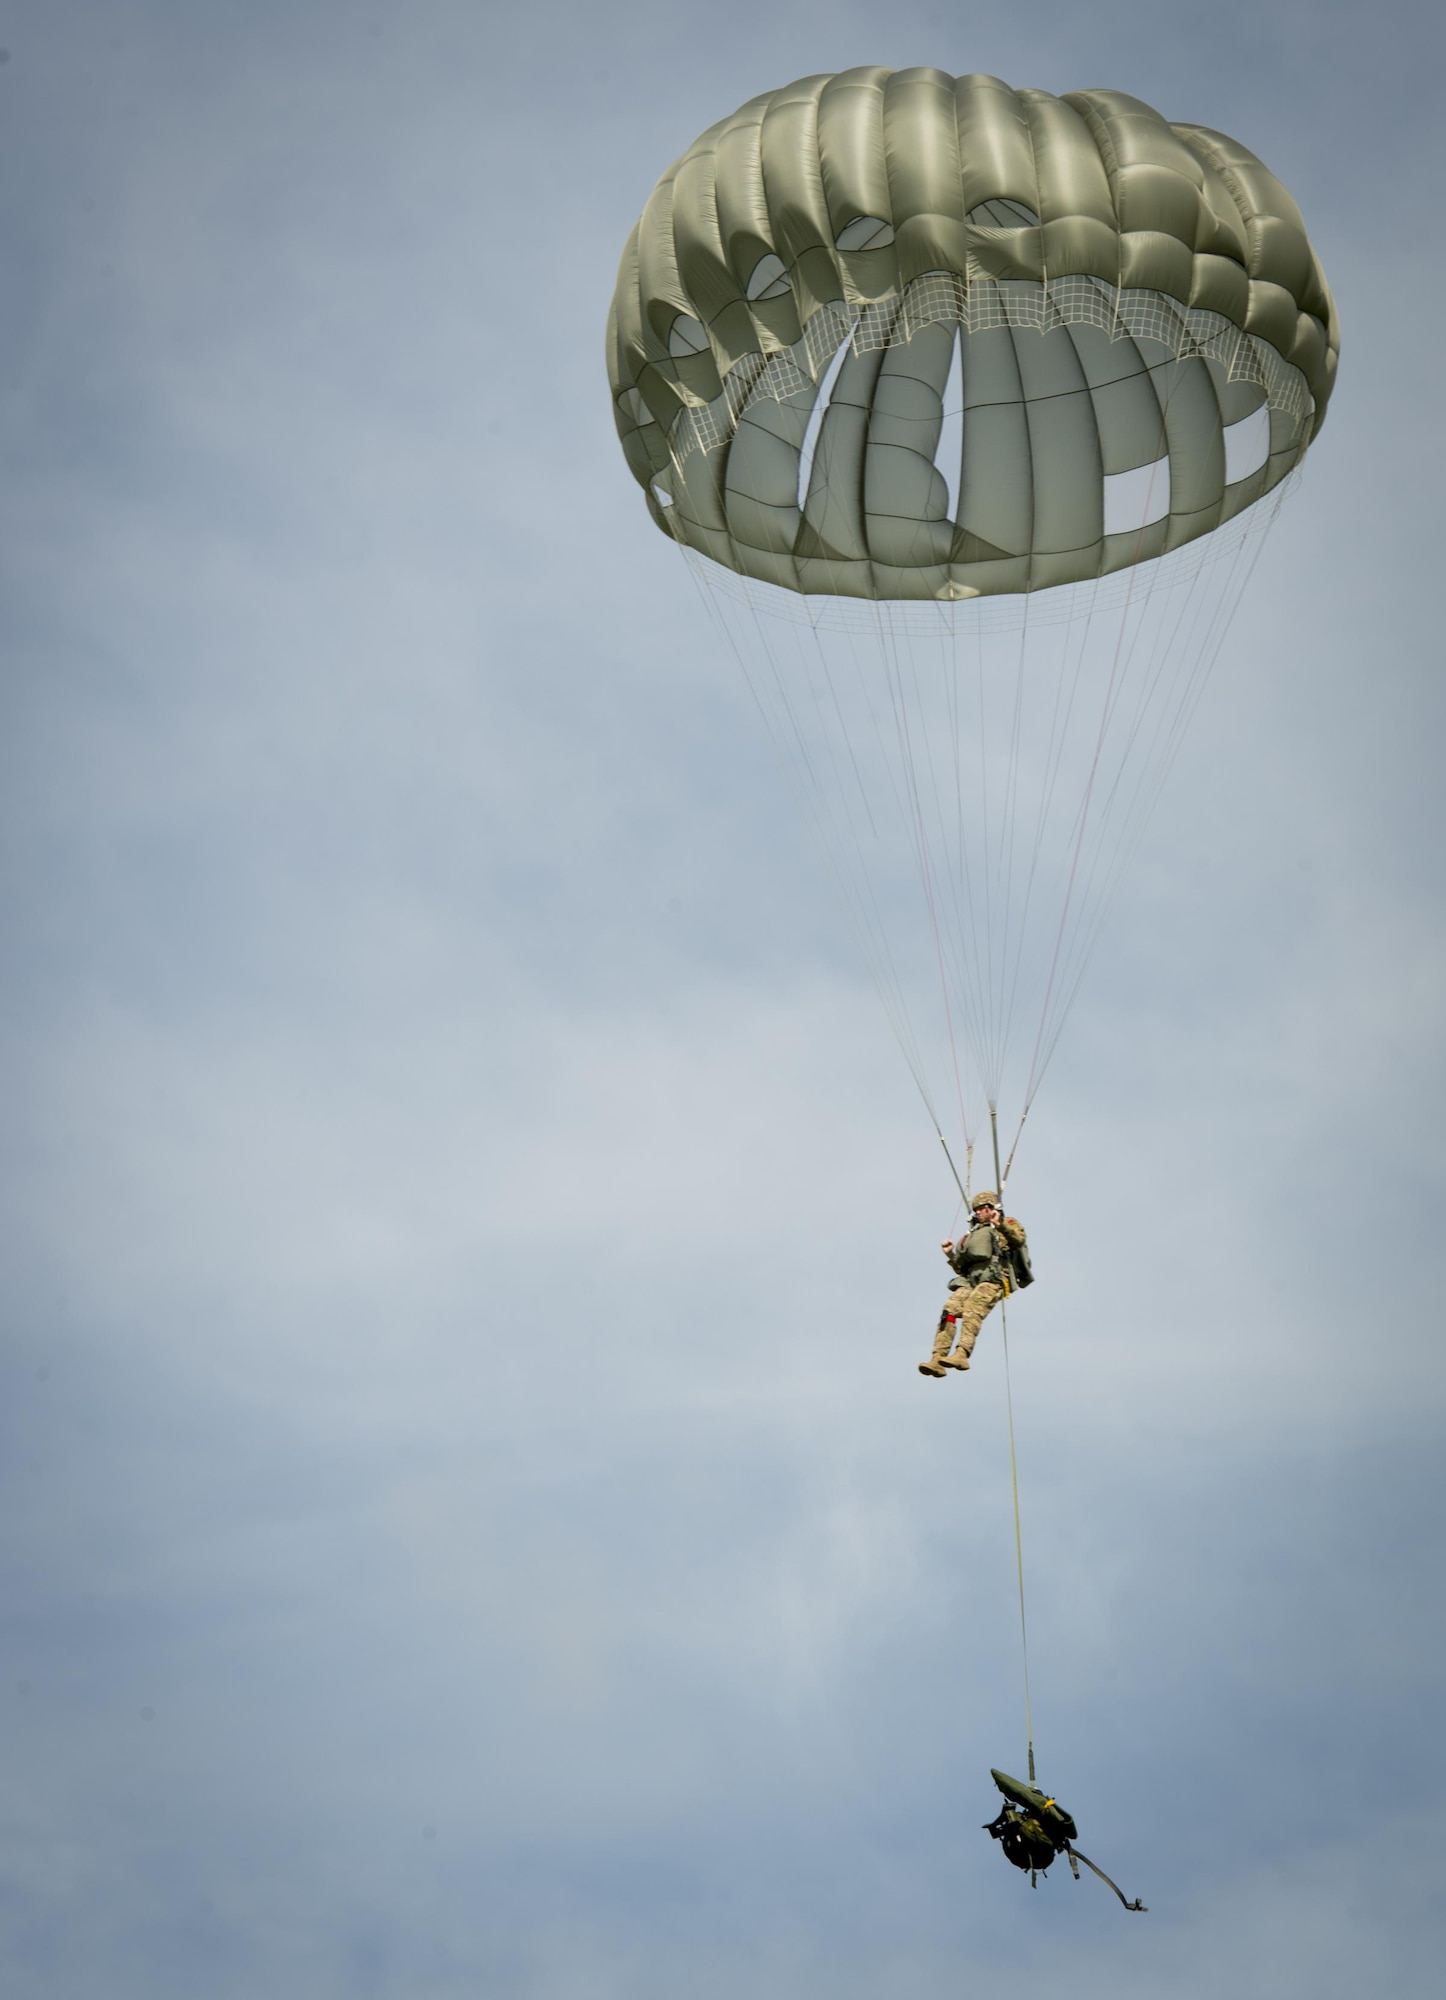 A service member from MacDill Air Force Base, Fla., parachutes during a training mission over Brooksville, Fla., July 15, 2017. Once the parachute has been activated, the jumper must direct the parachute so they can land in the drop zone. (U.S. Air Force photo by Senior Airmen Mariette Adams)